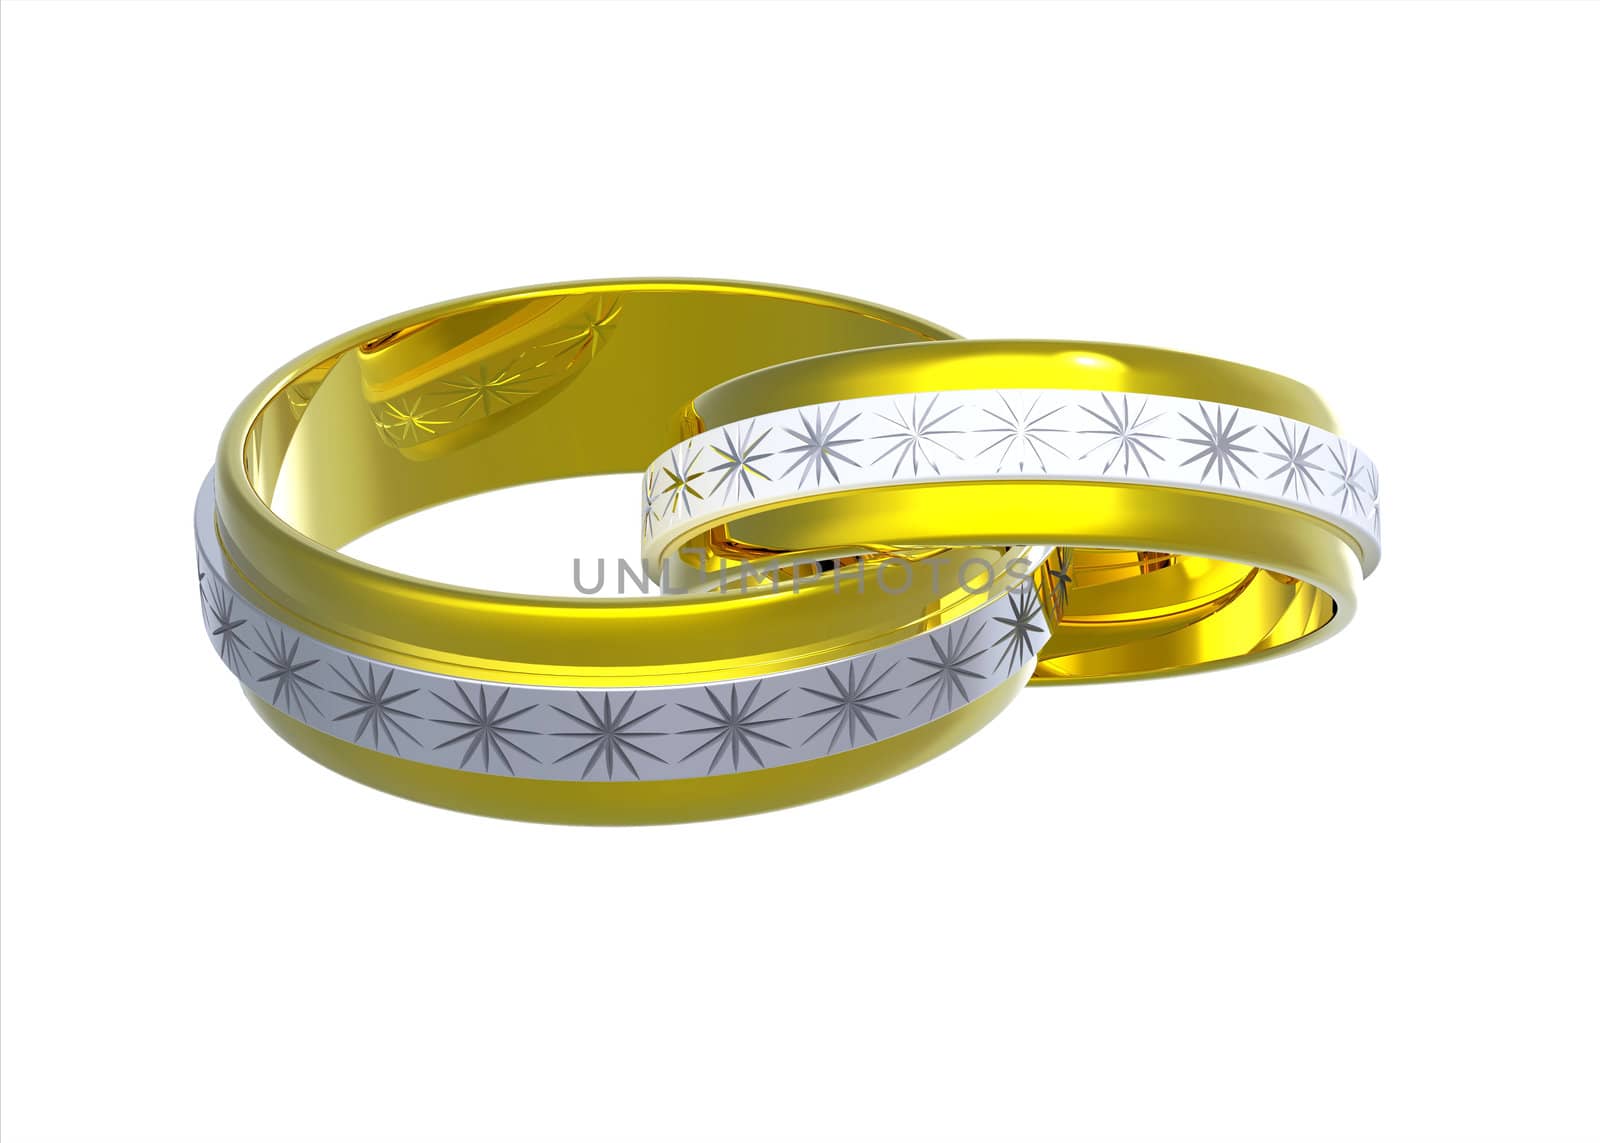 Two wedding rings, render, isolated on white